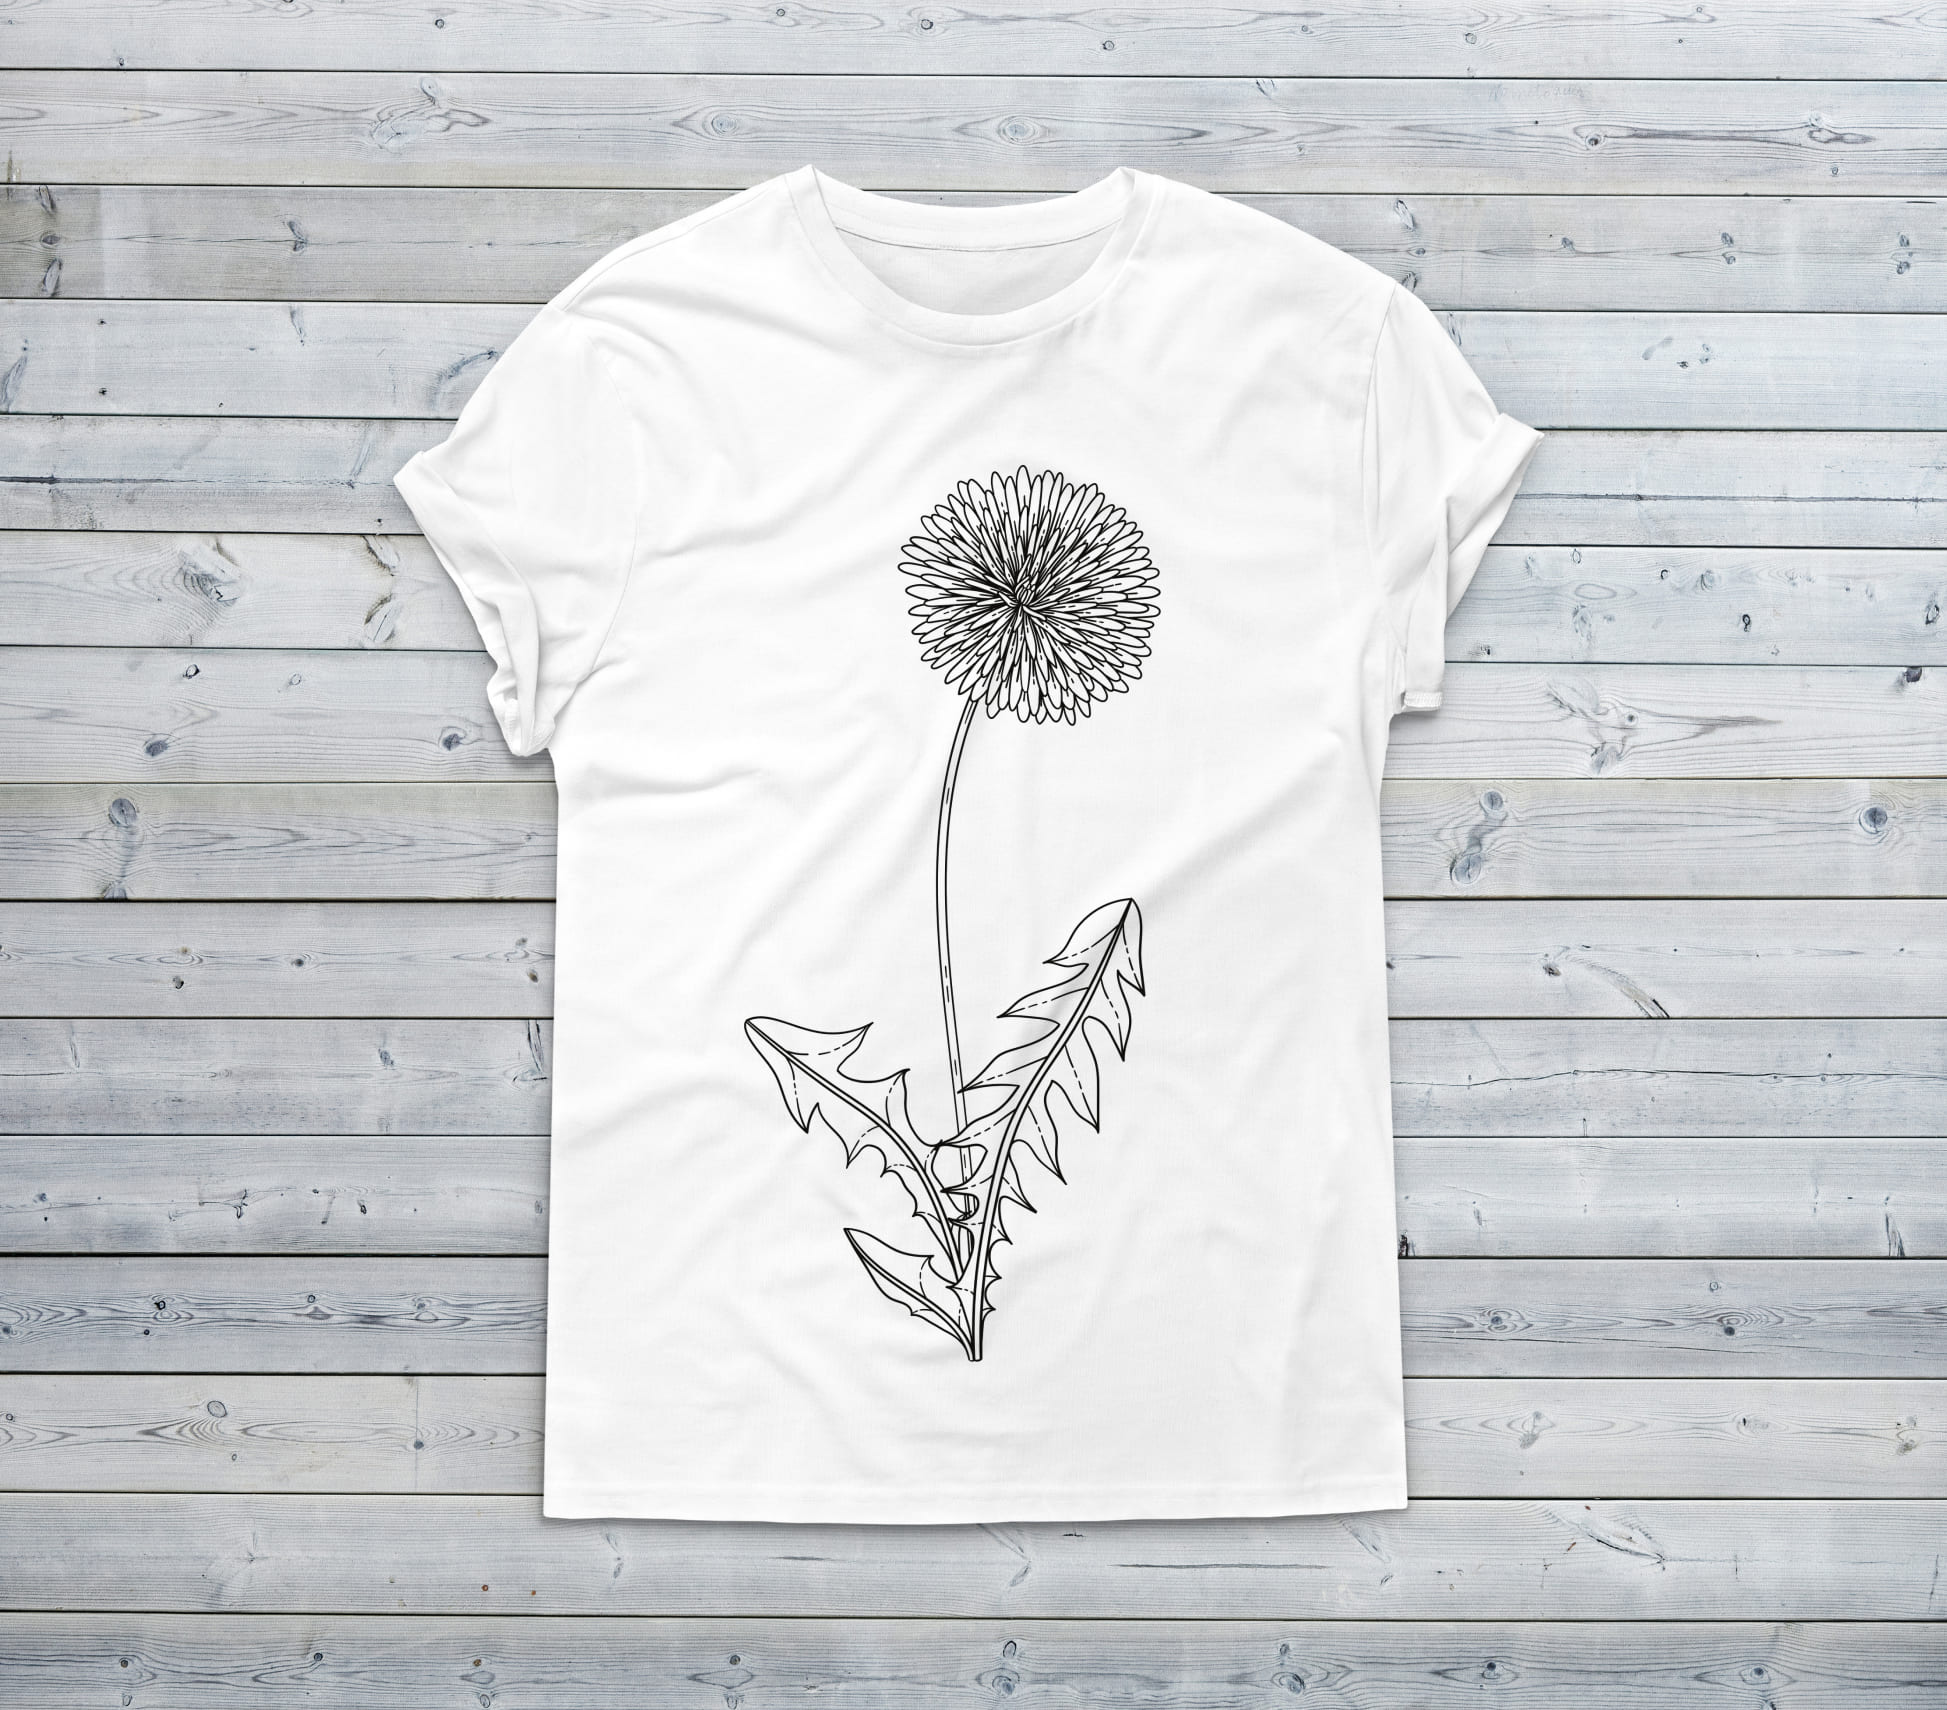 A white t-shirt with a simple dandelion flower on a wooden background.